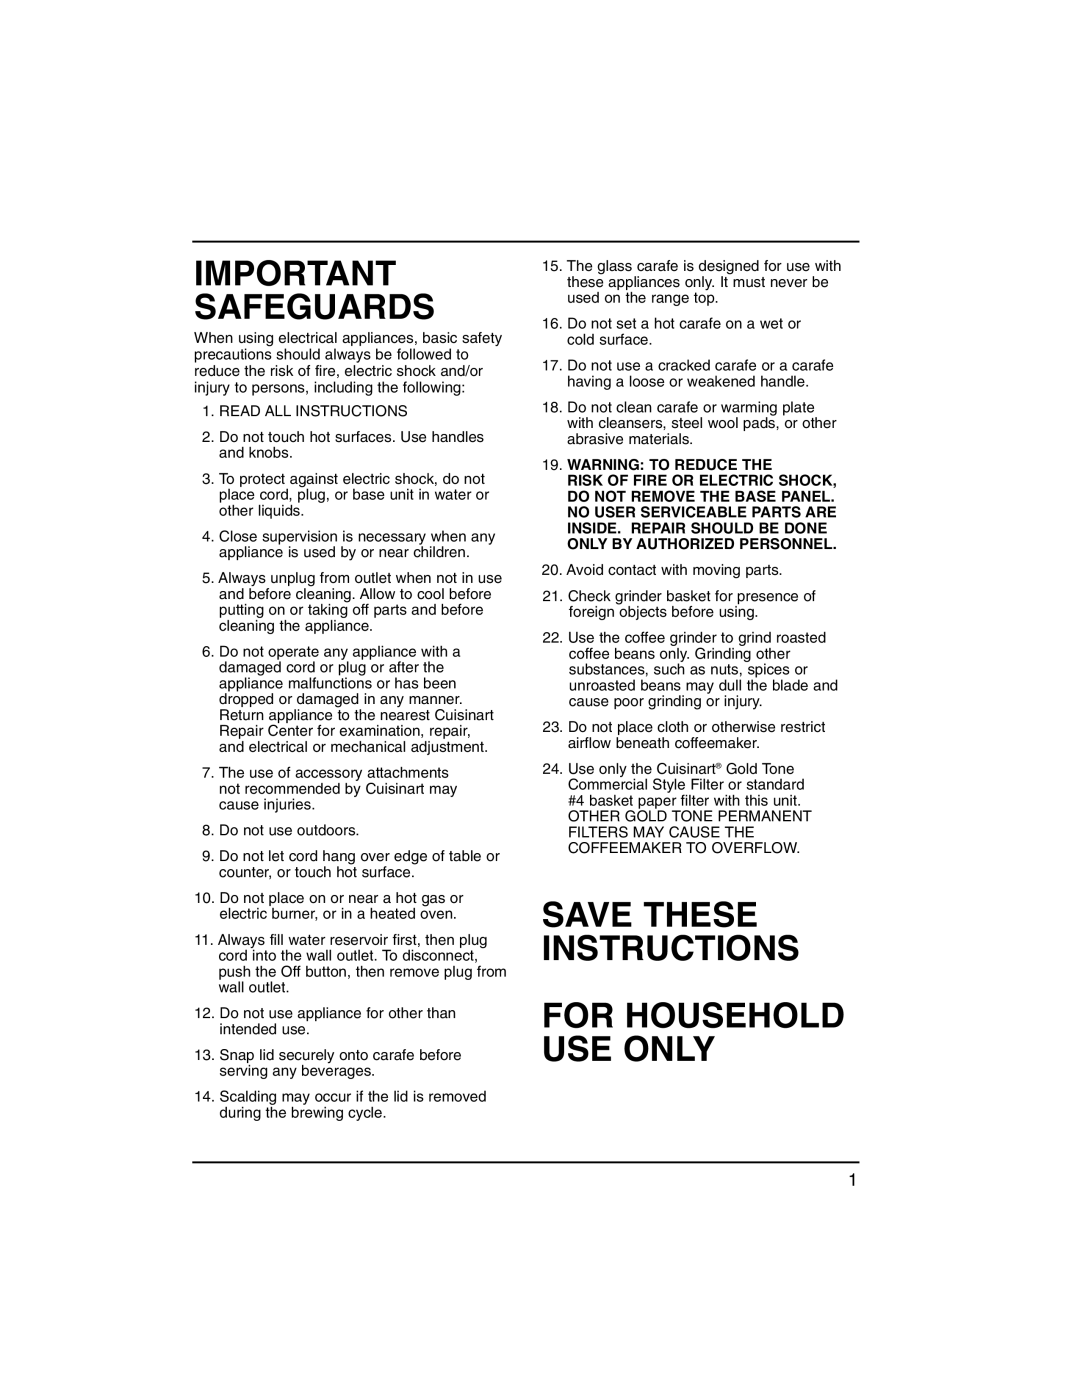 Cuisinart dgb500 manual Important Safeguards, Save These Instructions For Household Use Only, Warning To Reduce The 